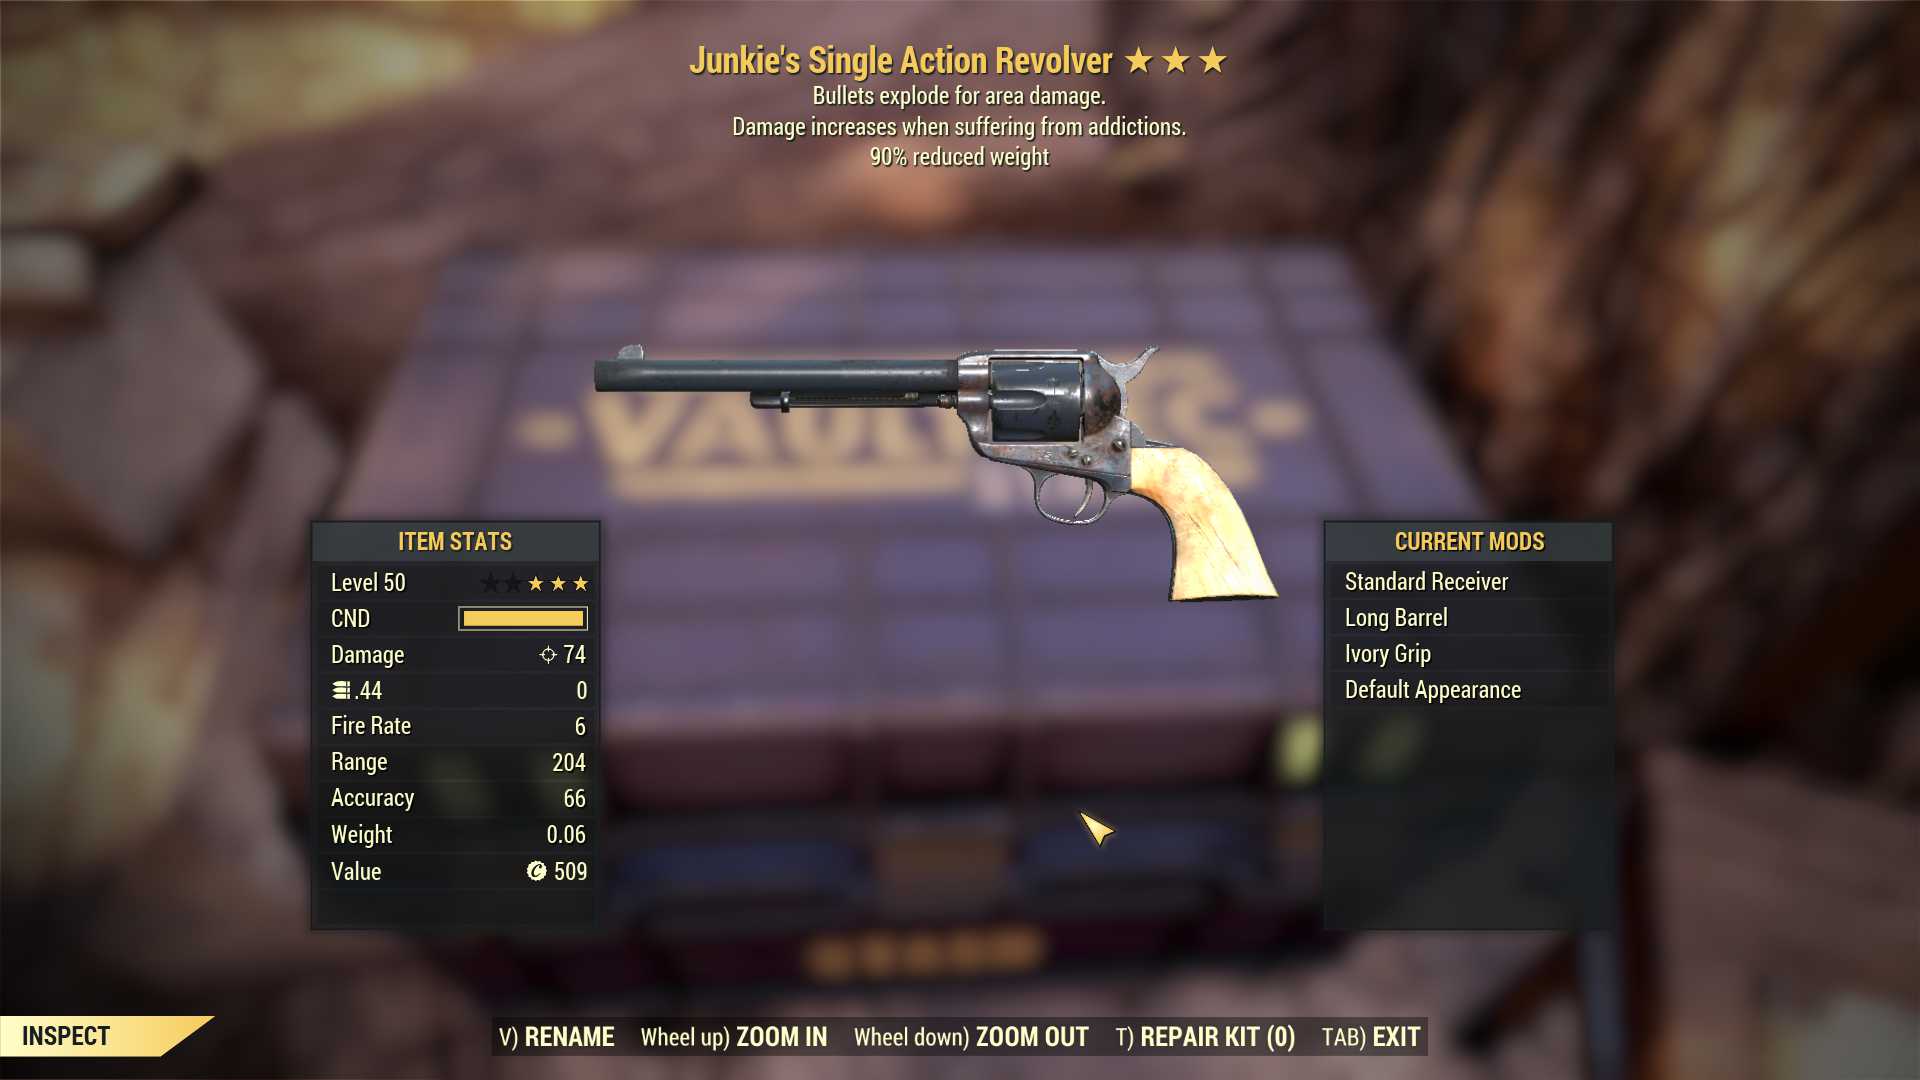 Junkie's Explosive Single Action Revolver (90% reduced weight)